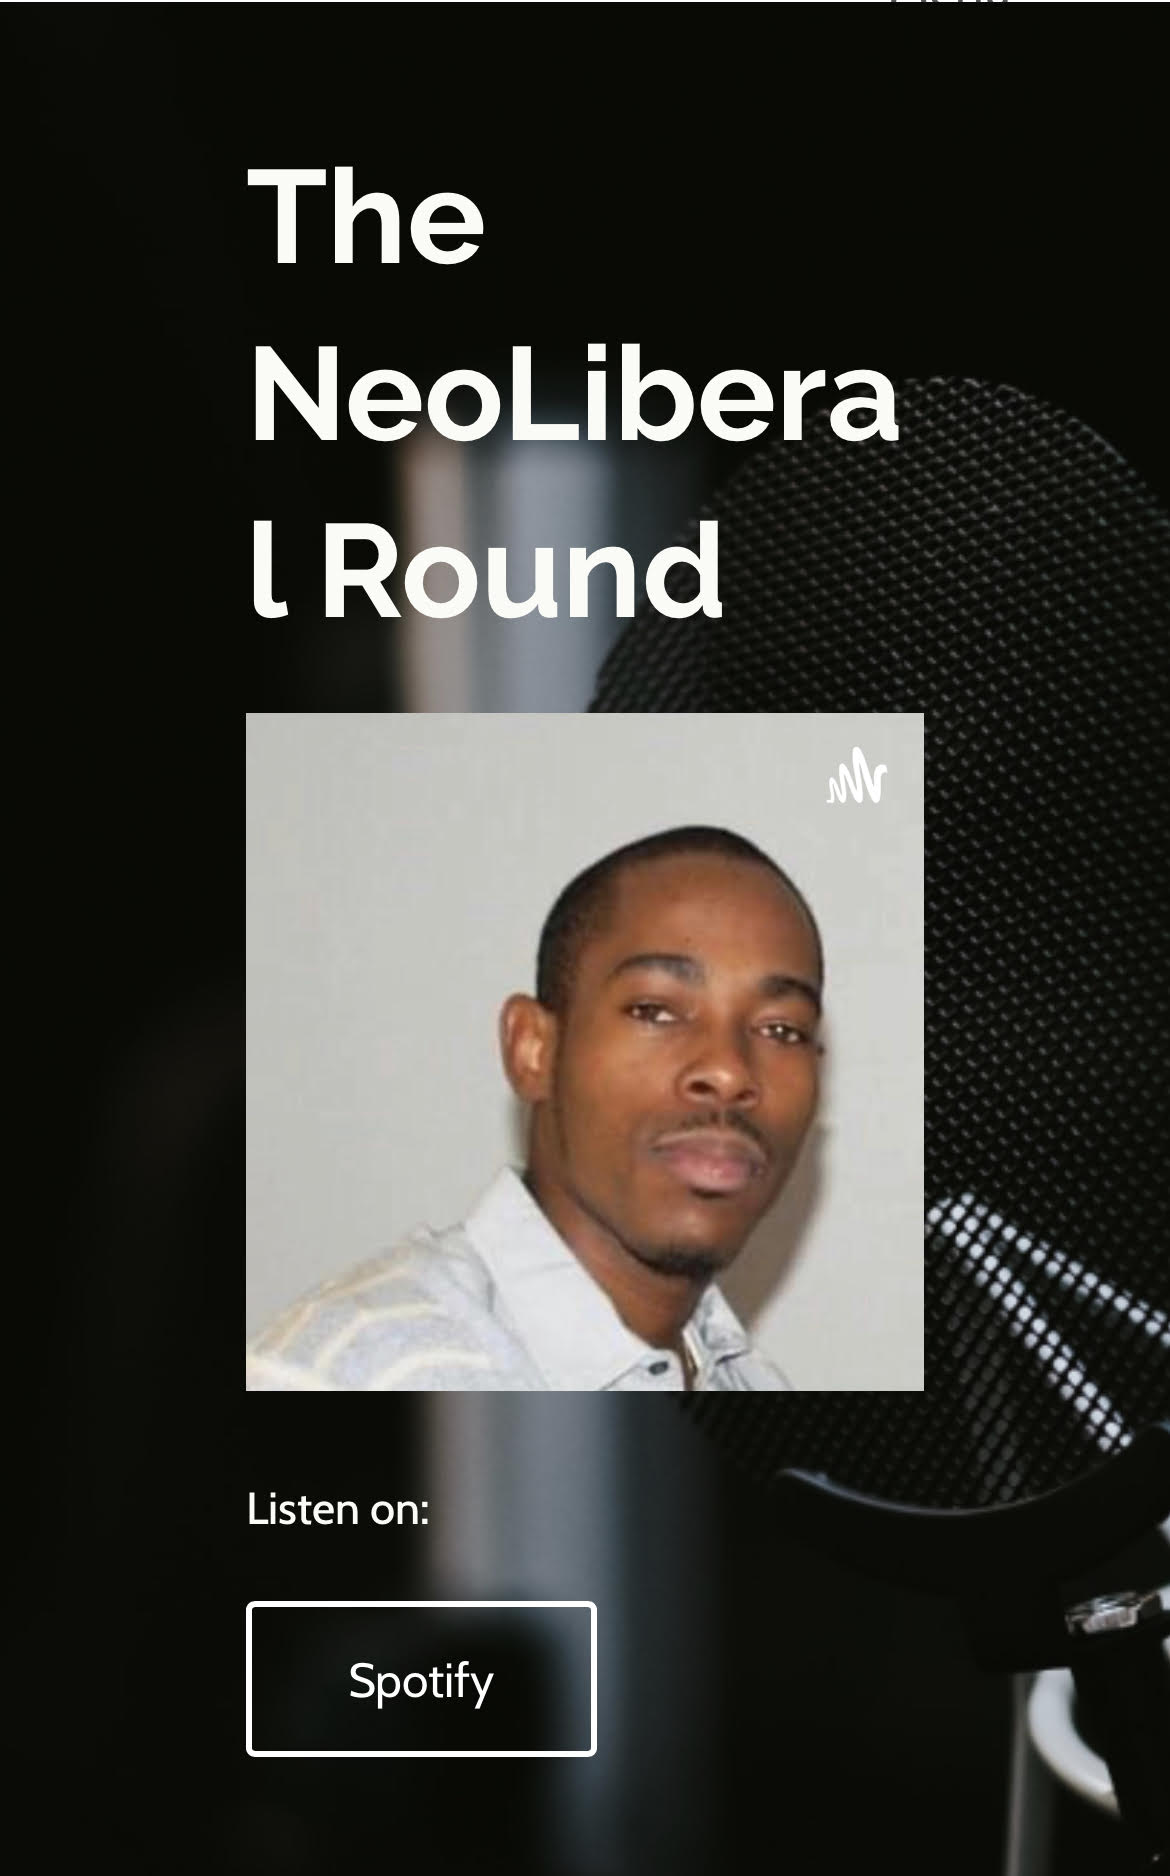 The NeoLiberal Round Show is Now Streaming On your Podcast — Check out our Trailer